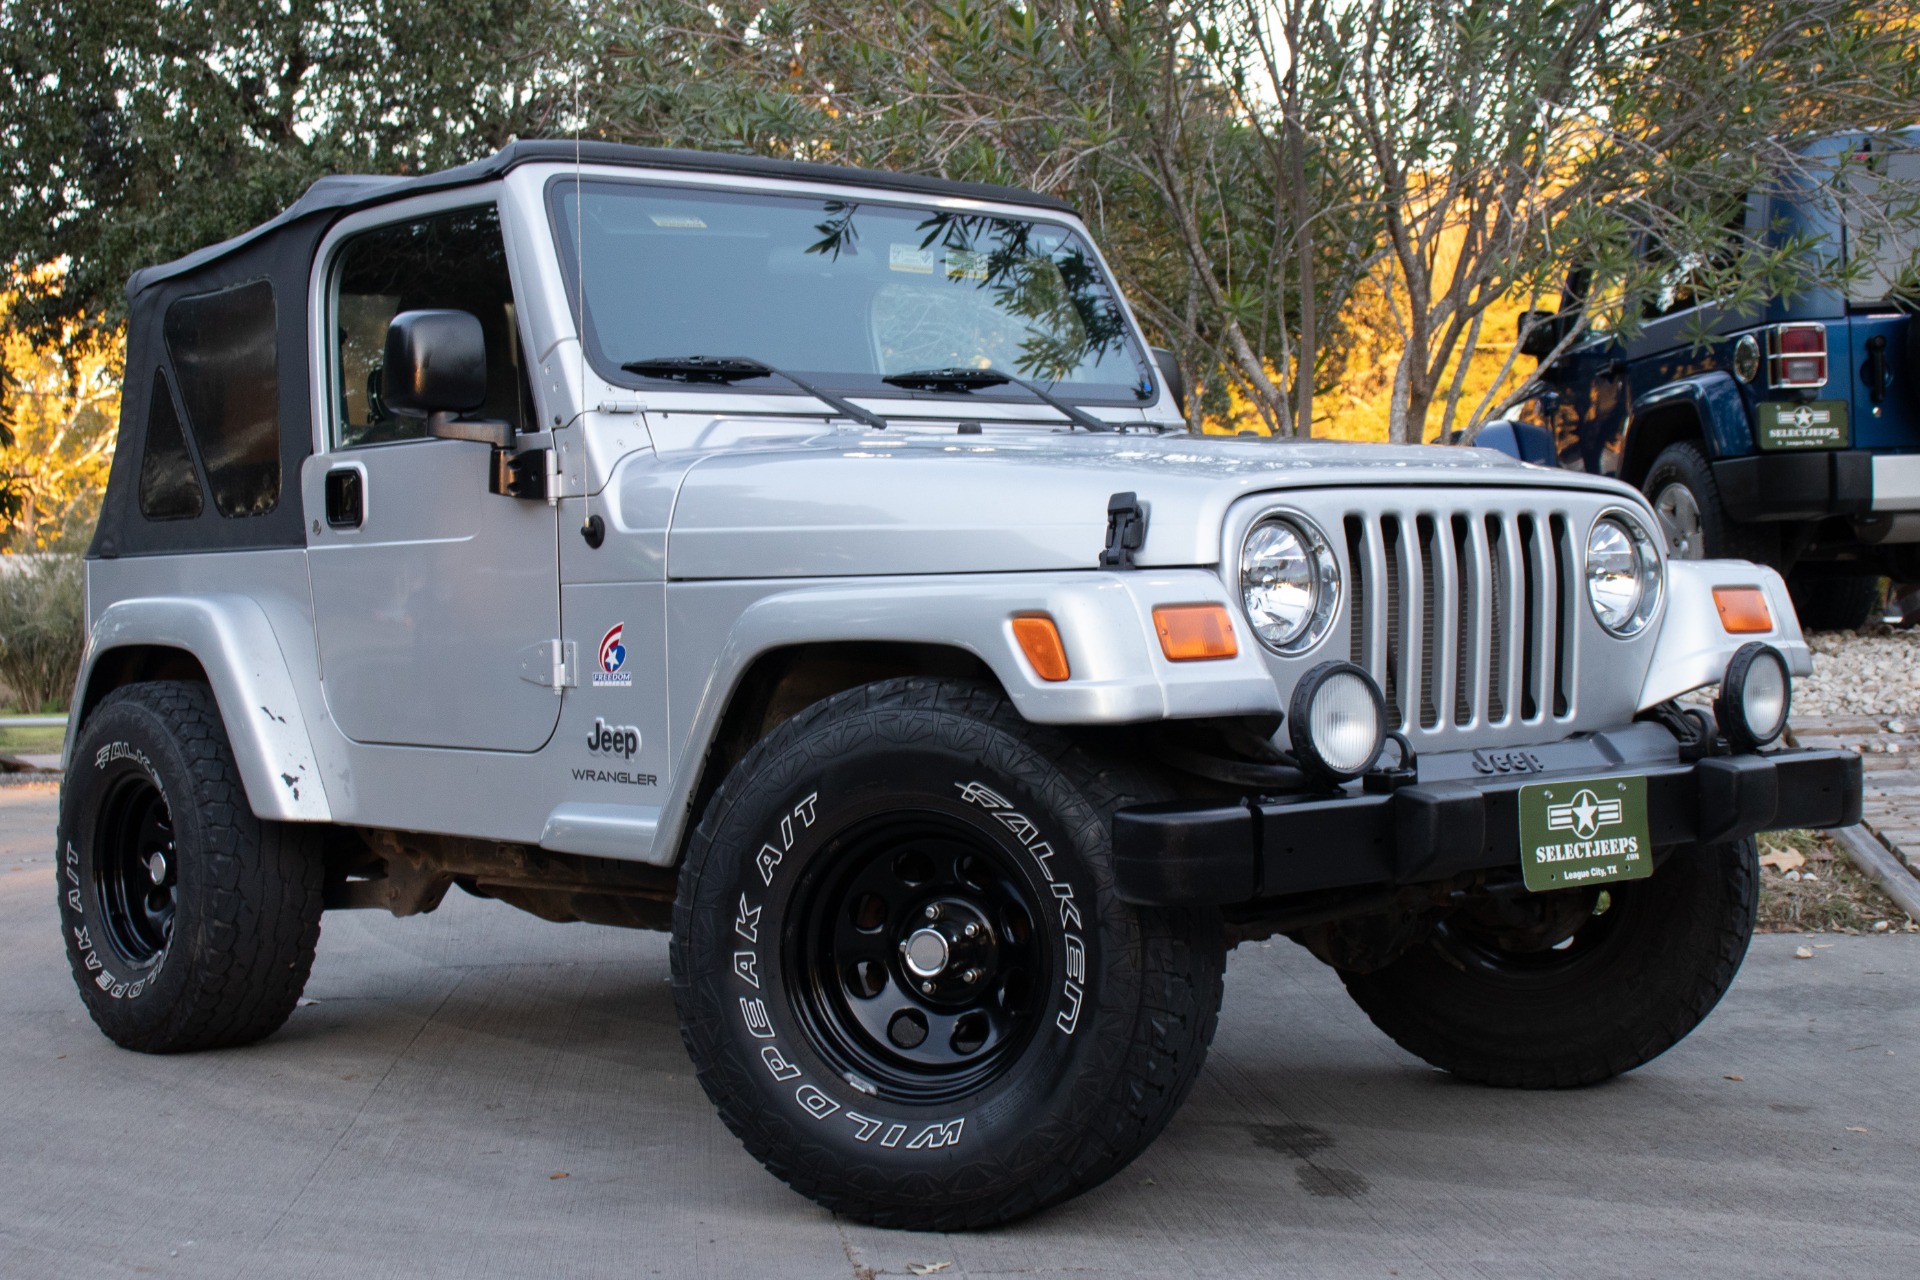 Used 2003 Jeep Wrangler Freedom Edition For Sale ($11,995) | Select Jeeps  Inc. Stock #363800